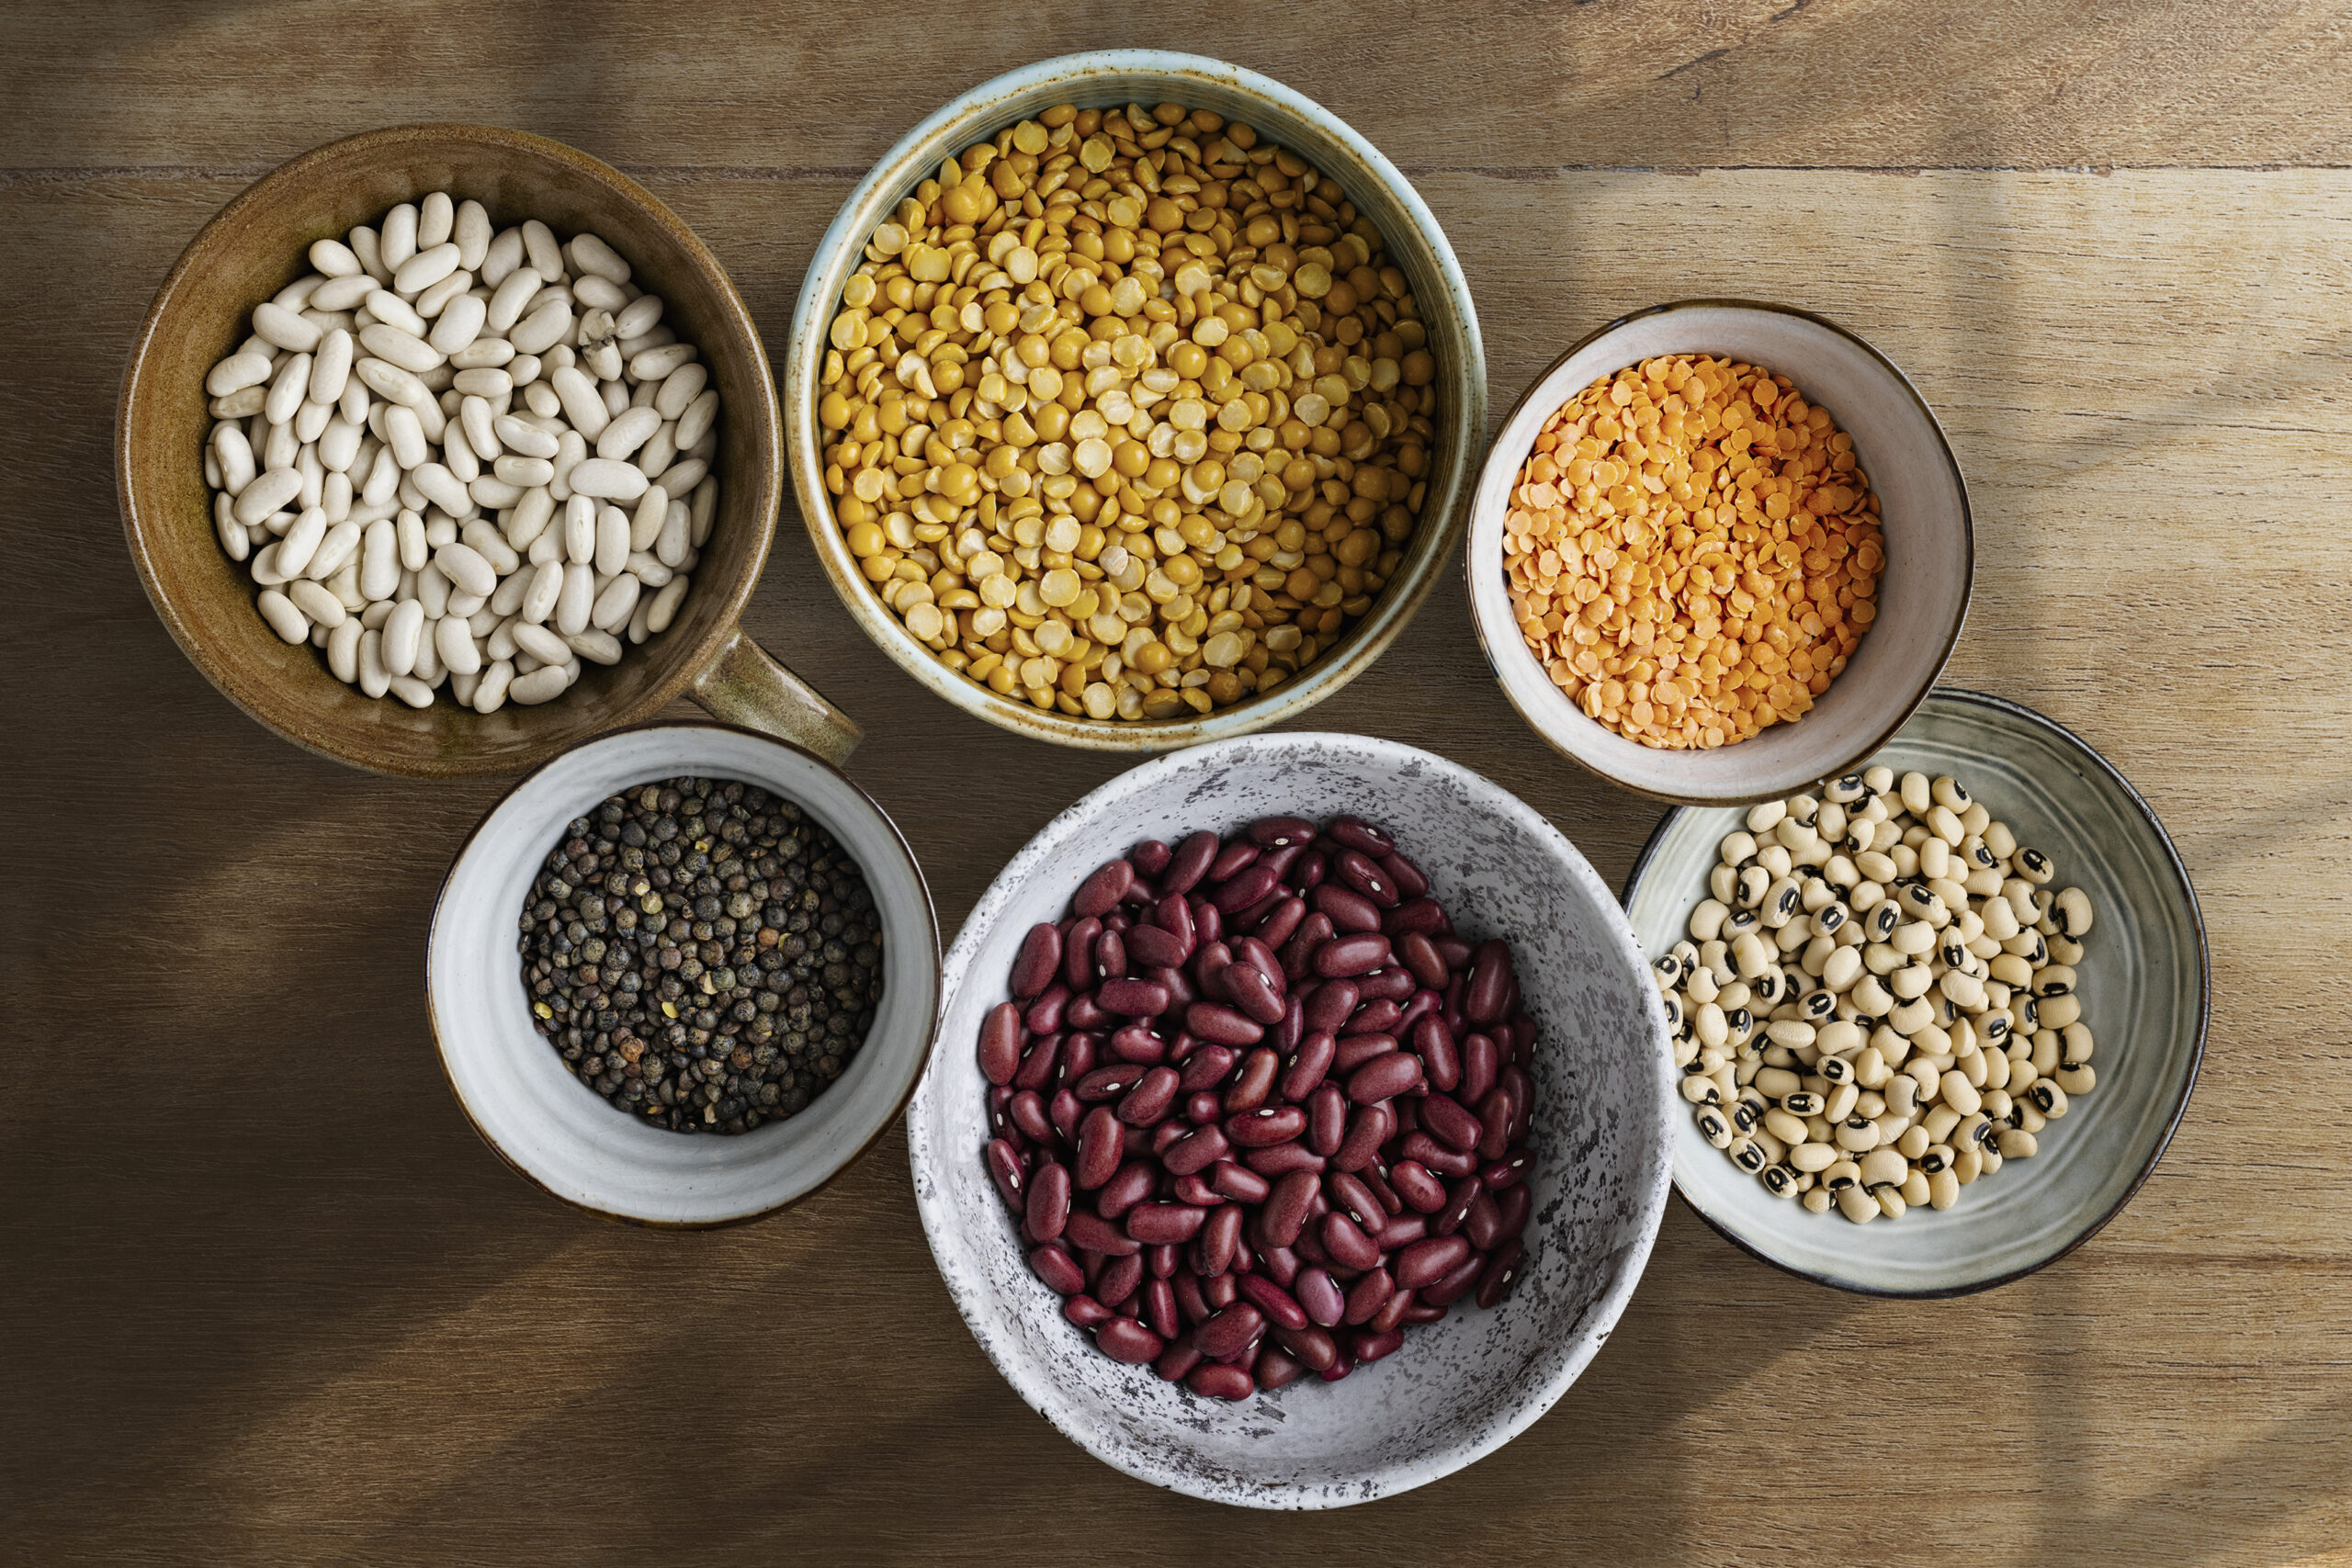 Read more about the article Peru, Ecuador and Colombia imported more than 181 thousand kilograms of seeds valued at 26.7 million dollars, CIF value